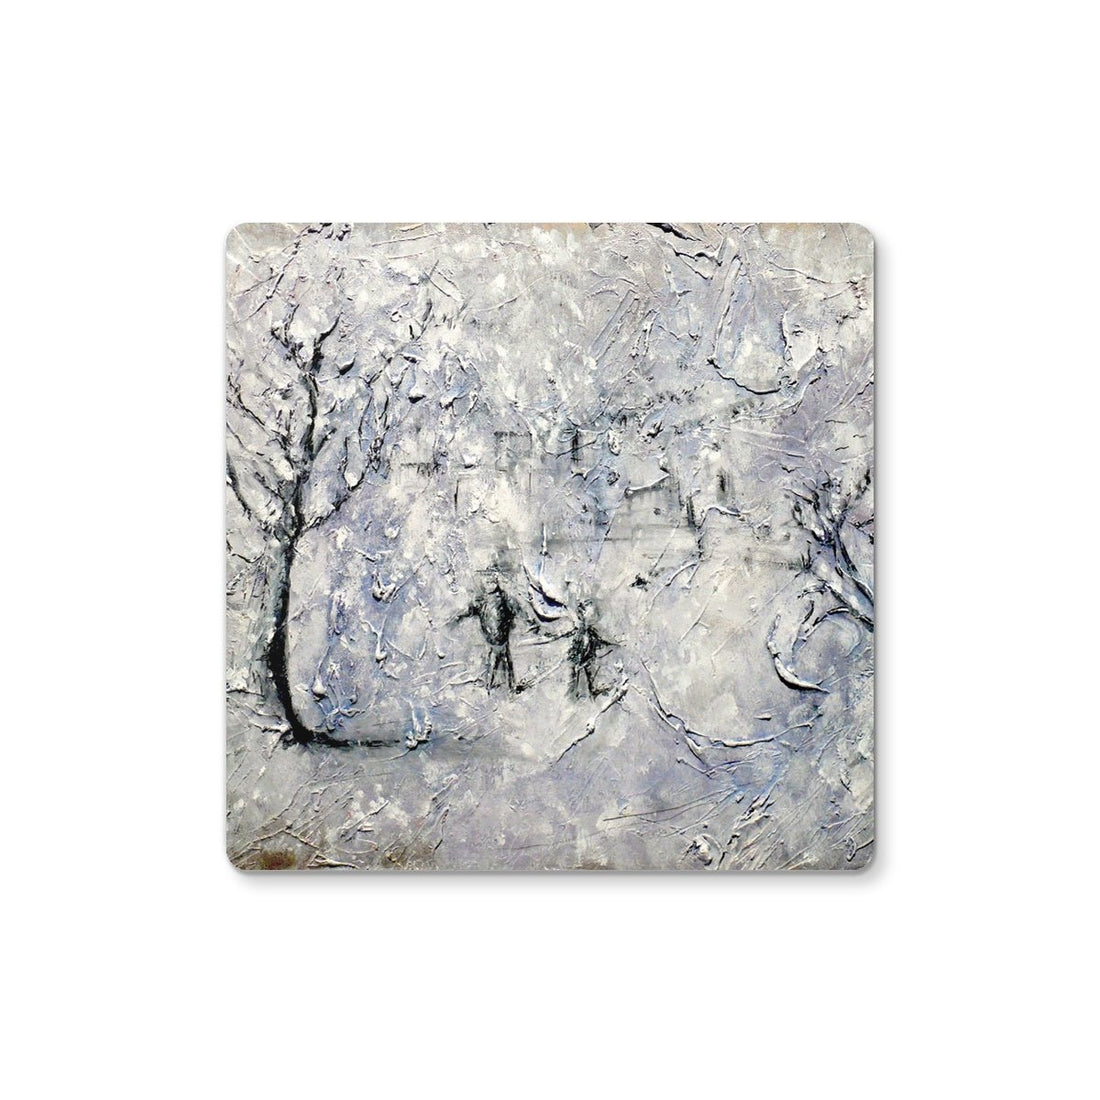 Father Daughter Snow Art Gifts Coaster Scotland